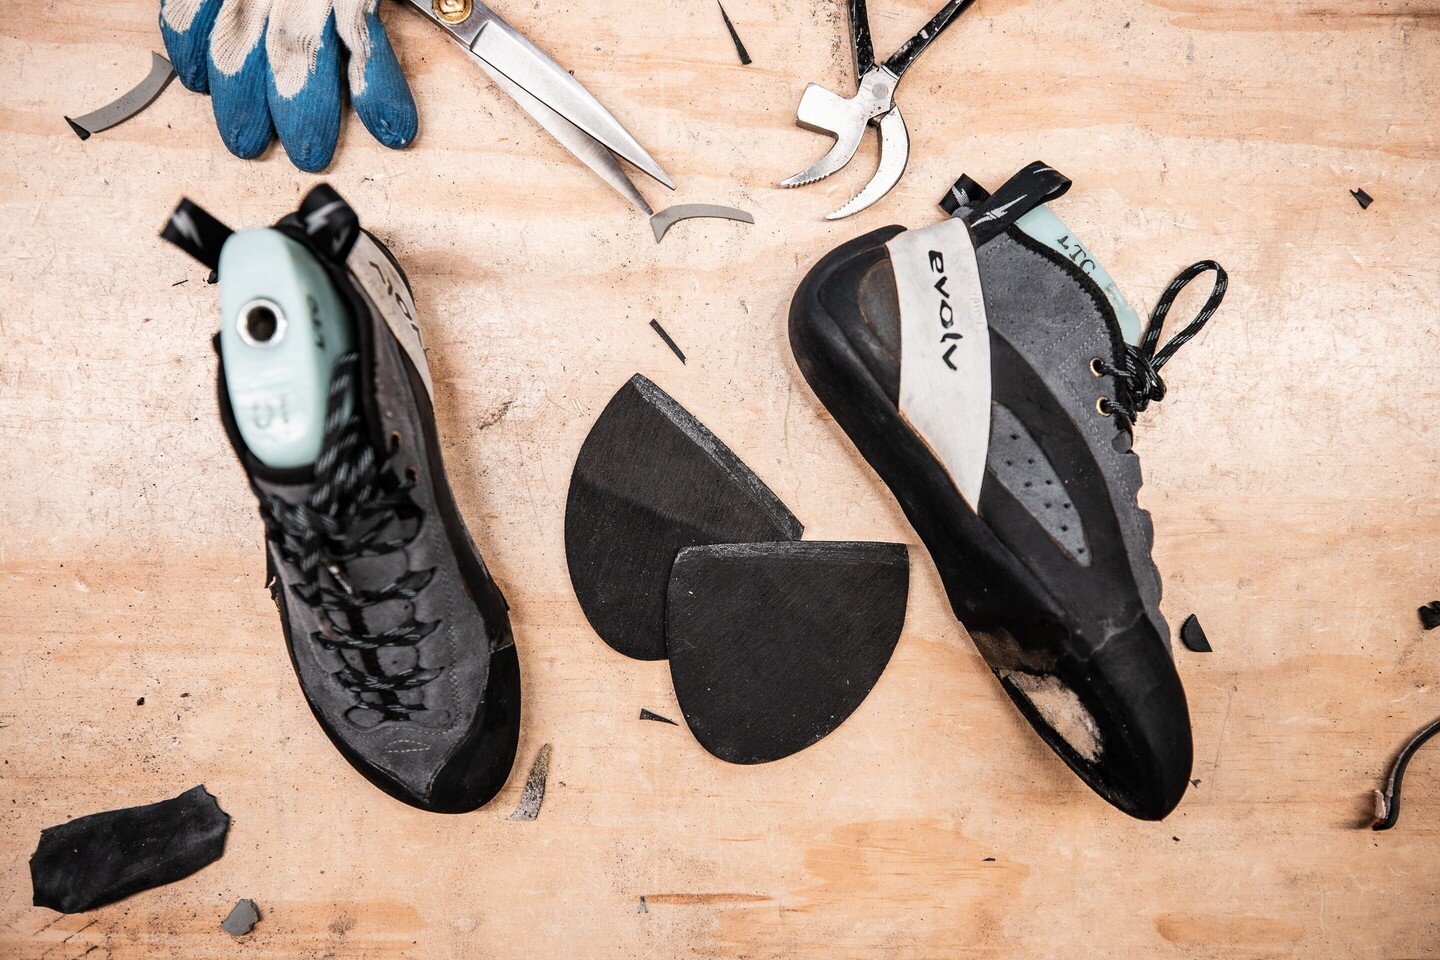 Happy Earth Day! Want to WIN FREE SHOES?!

We try to do our part in the manufacturing of our products to limit our impact on the planet. With our new Yosemite Bum climbing shoes, we've teamed up with our in-house resole team @yosemitebum to try and h